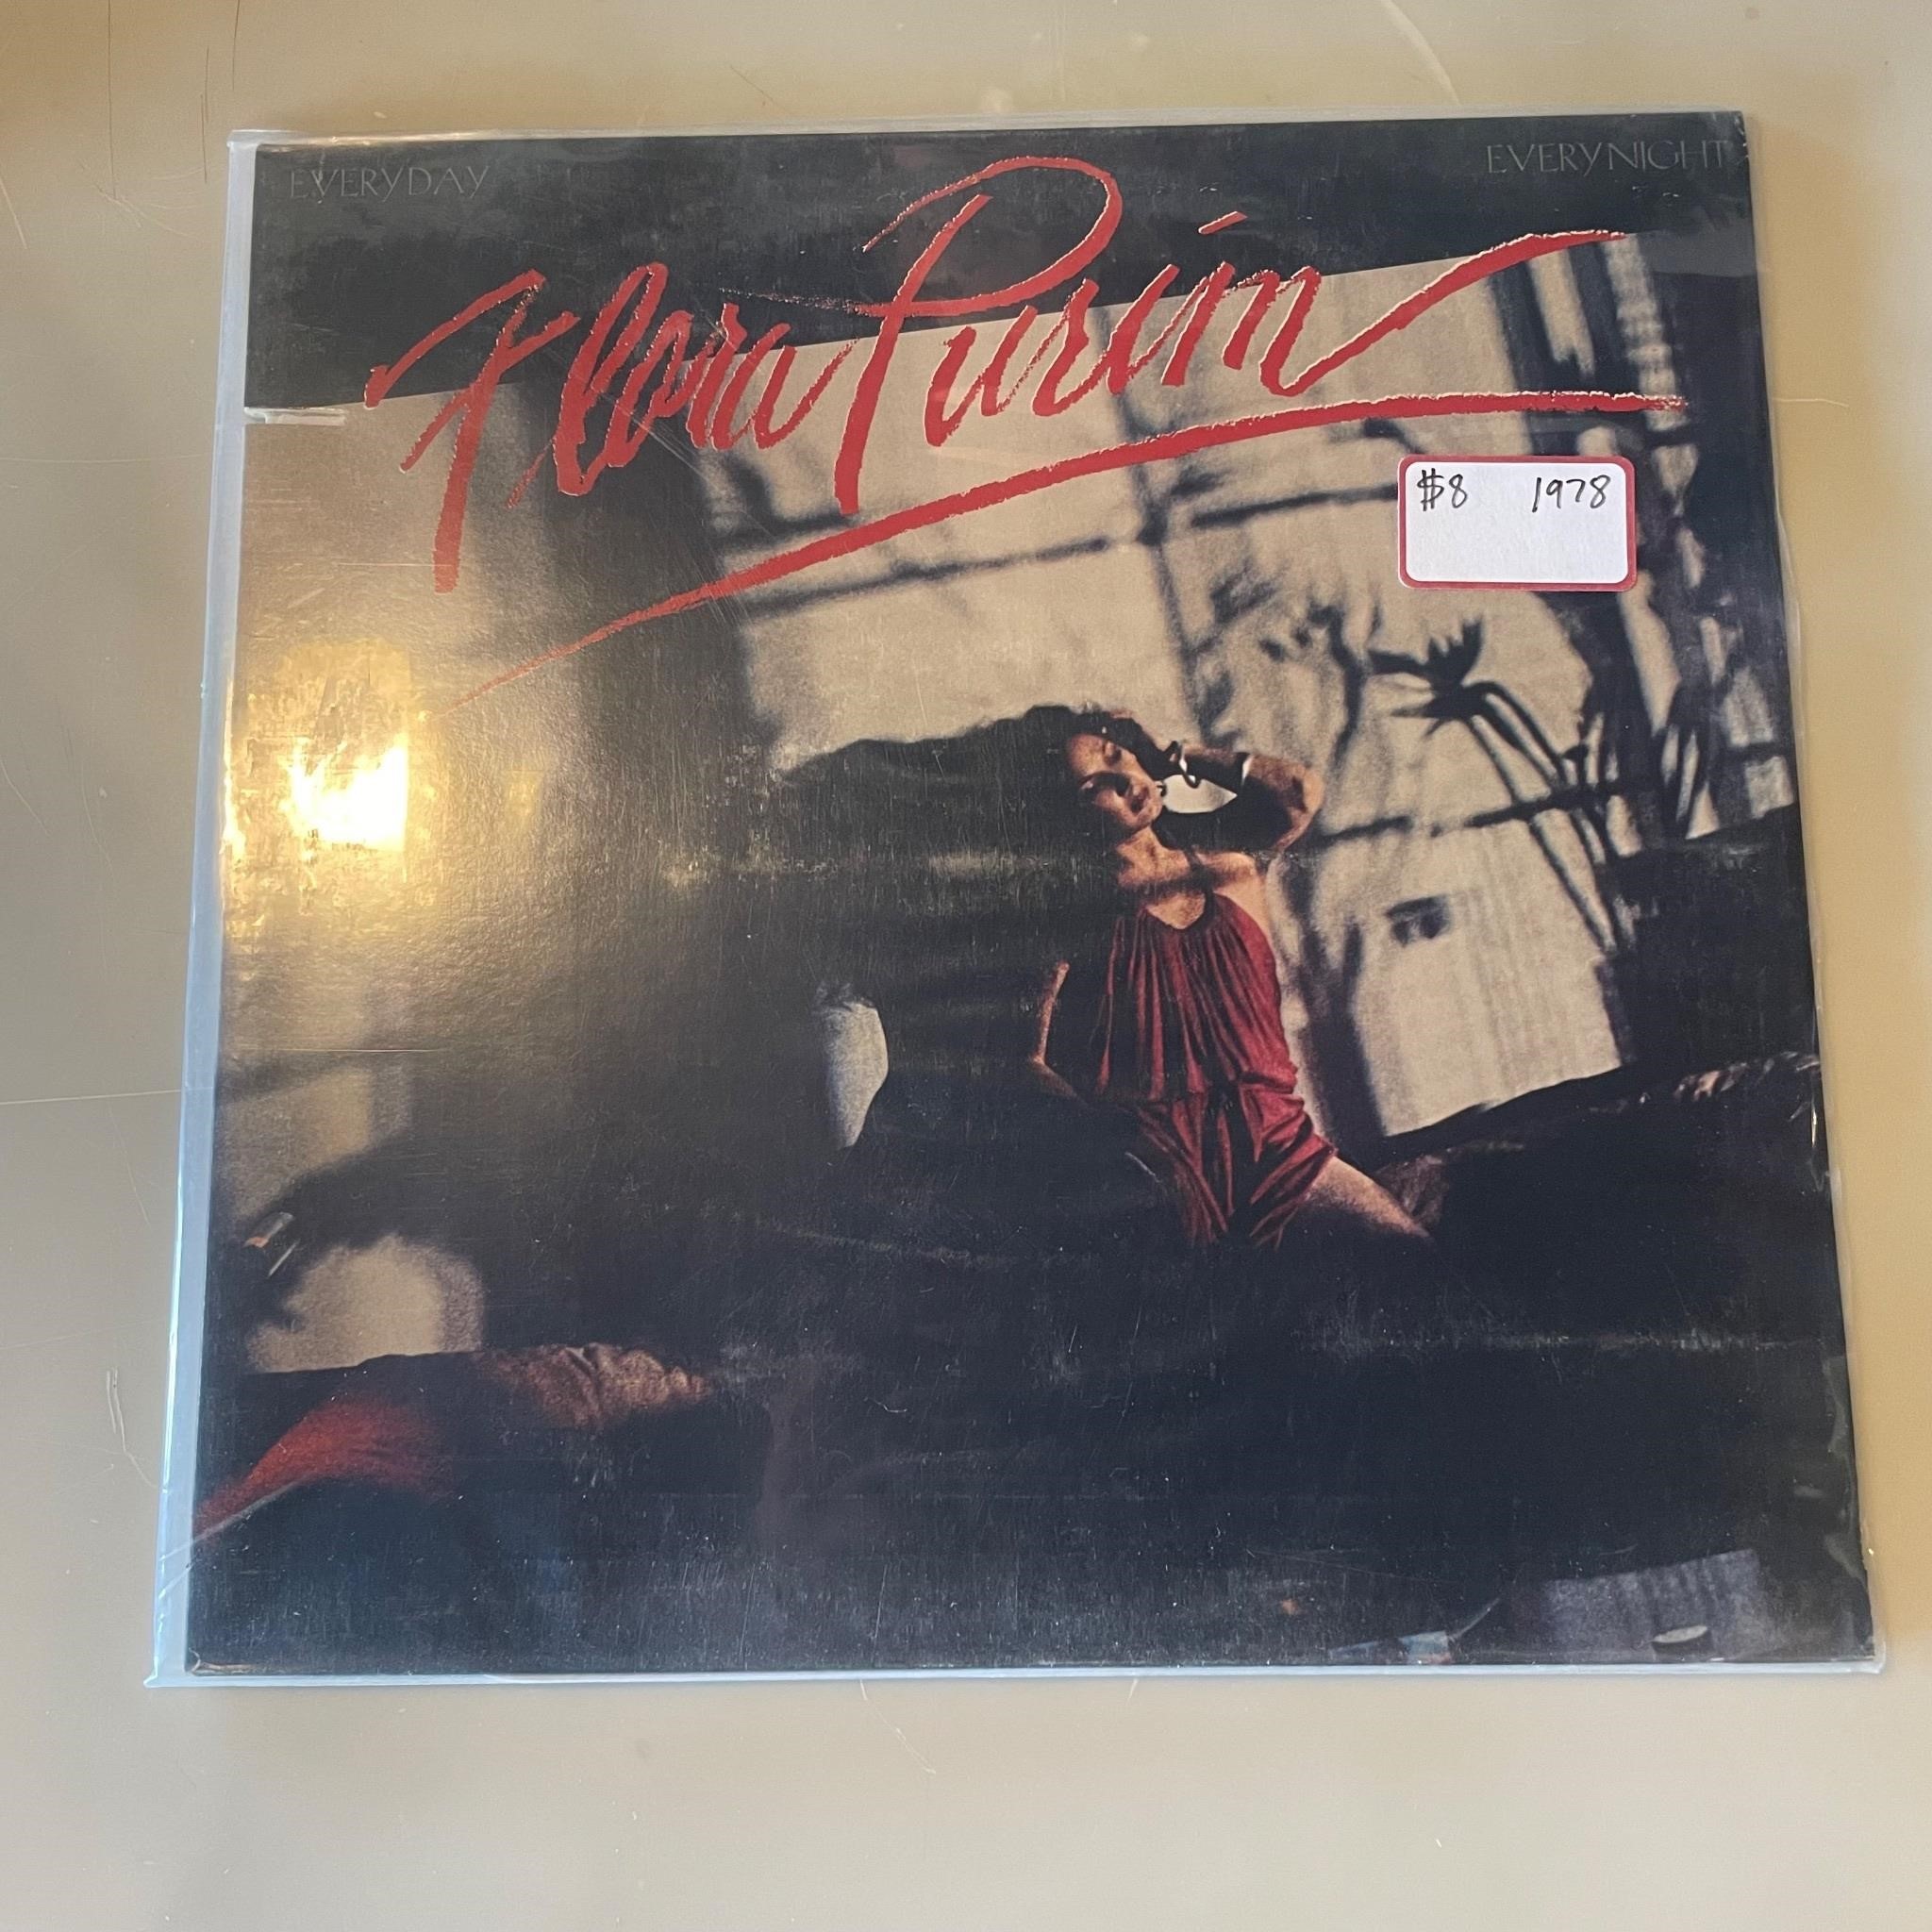 VINYL RECORD Weekly auction UNLIMITED $12 SHIPMENT